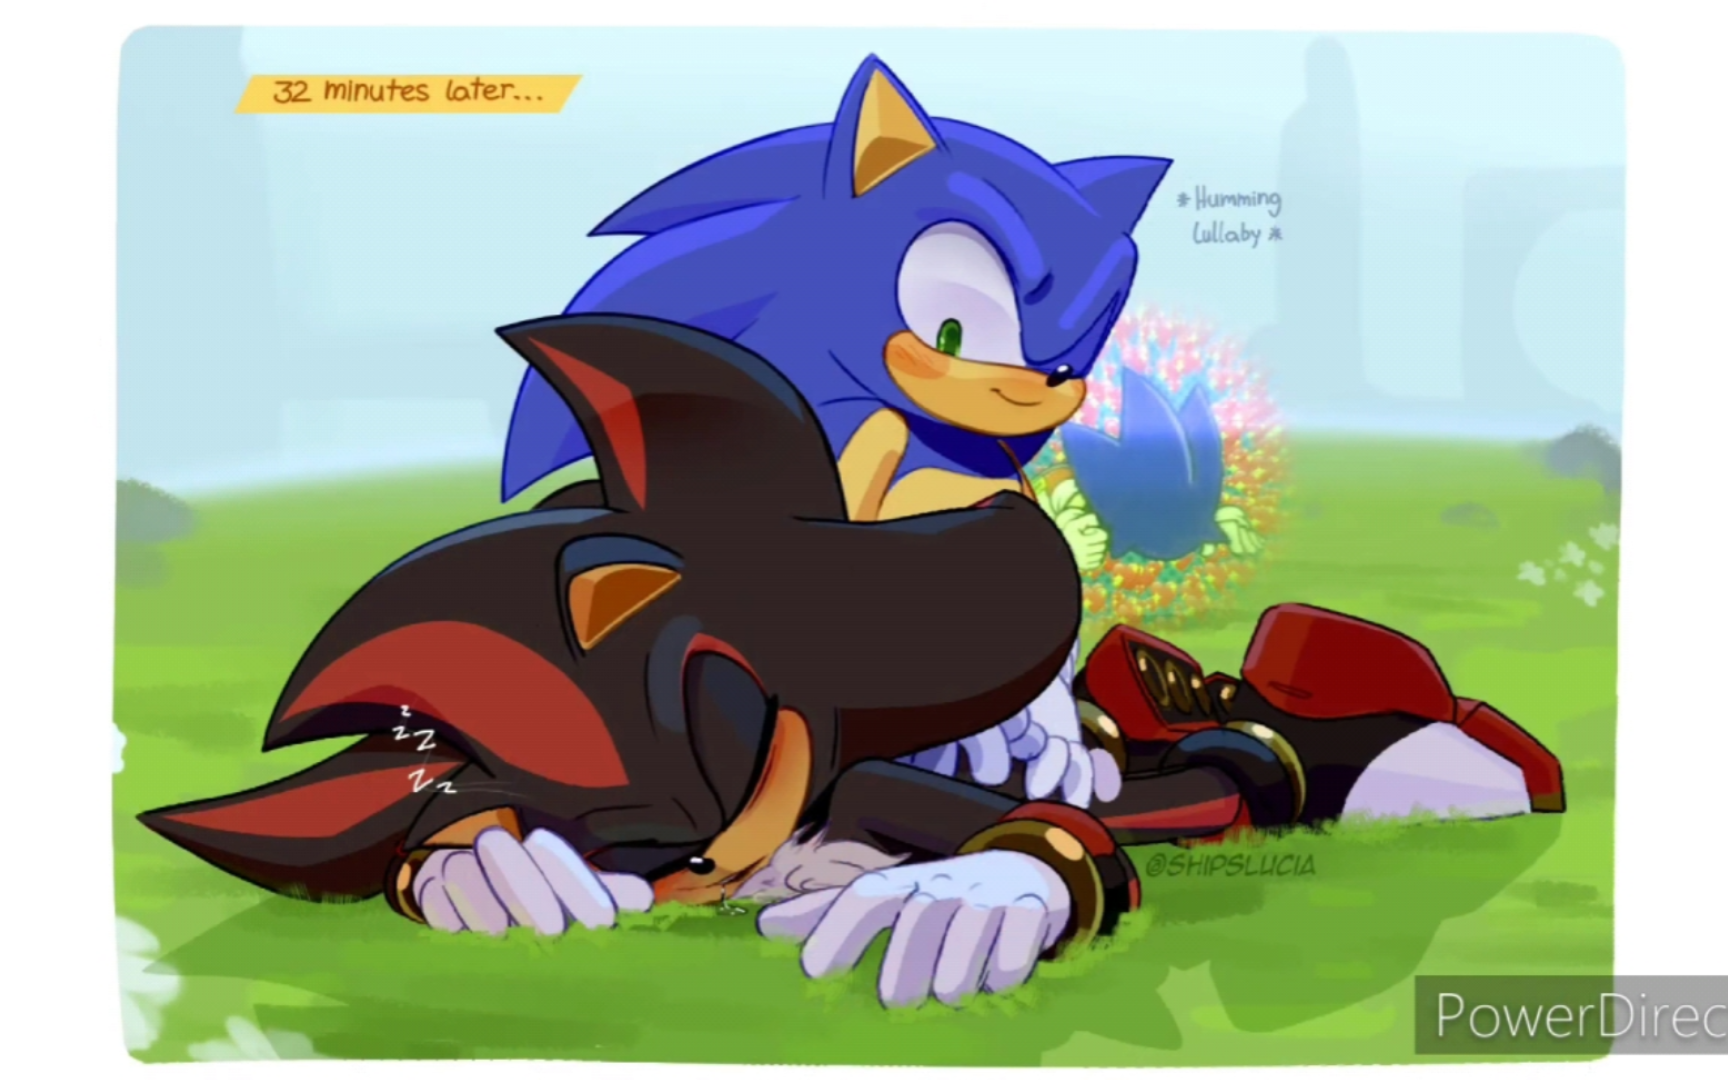 ［Sonadow Comic］Giving My Pookie A Massage .